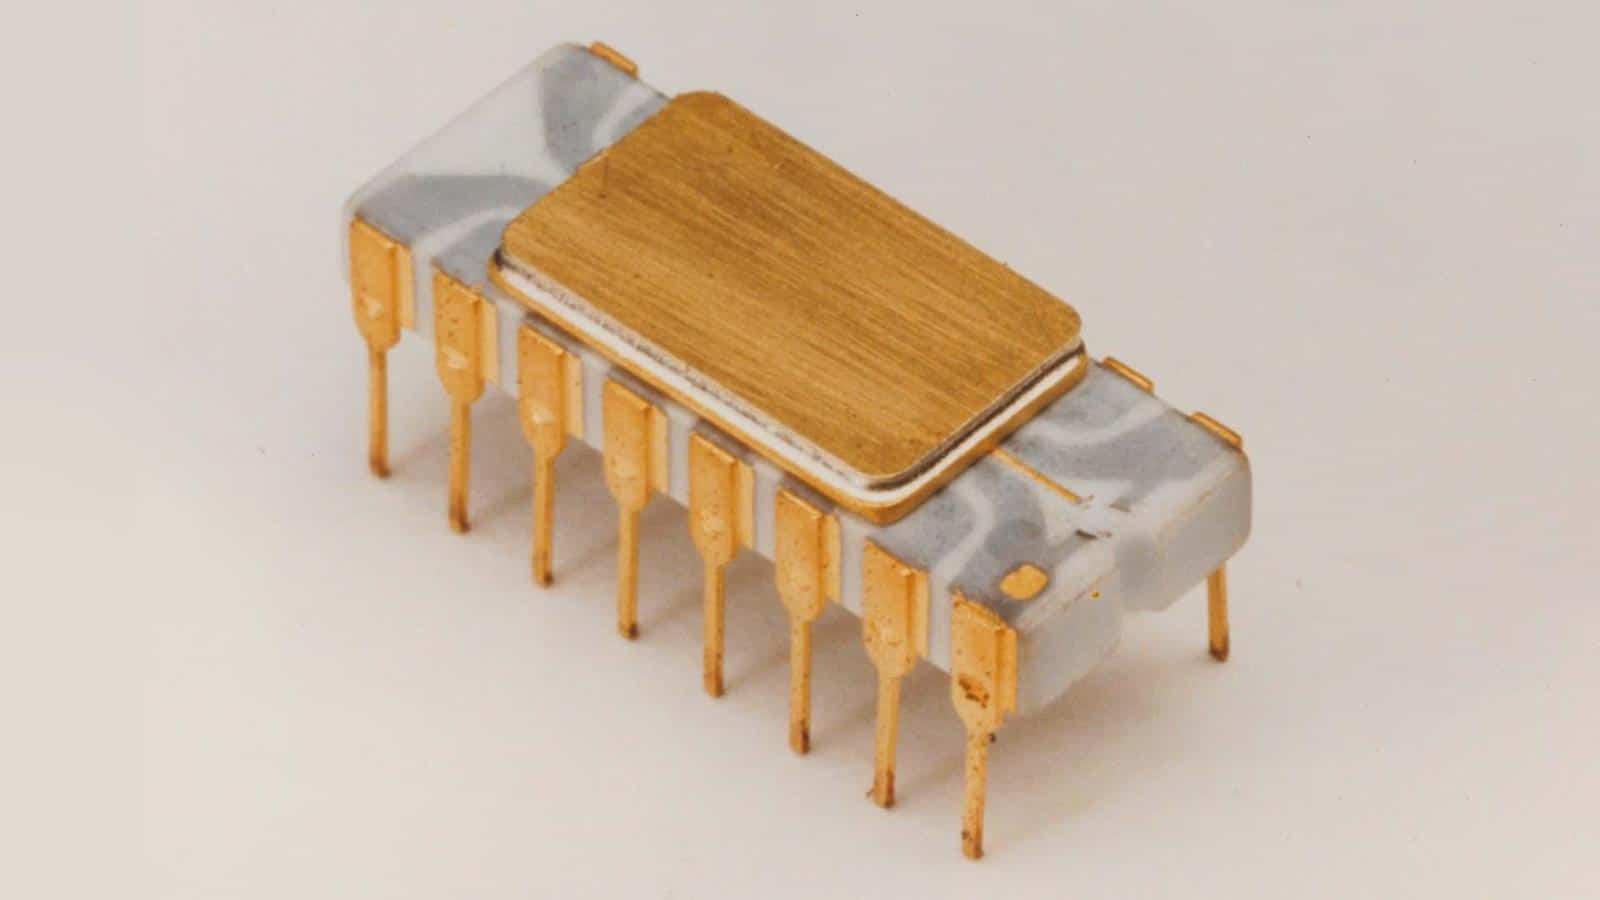 Intel is celebrating.  Half a century ago, the first 4004 microprocessor was created